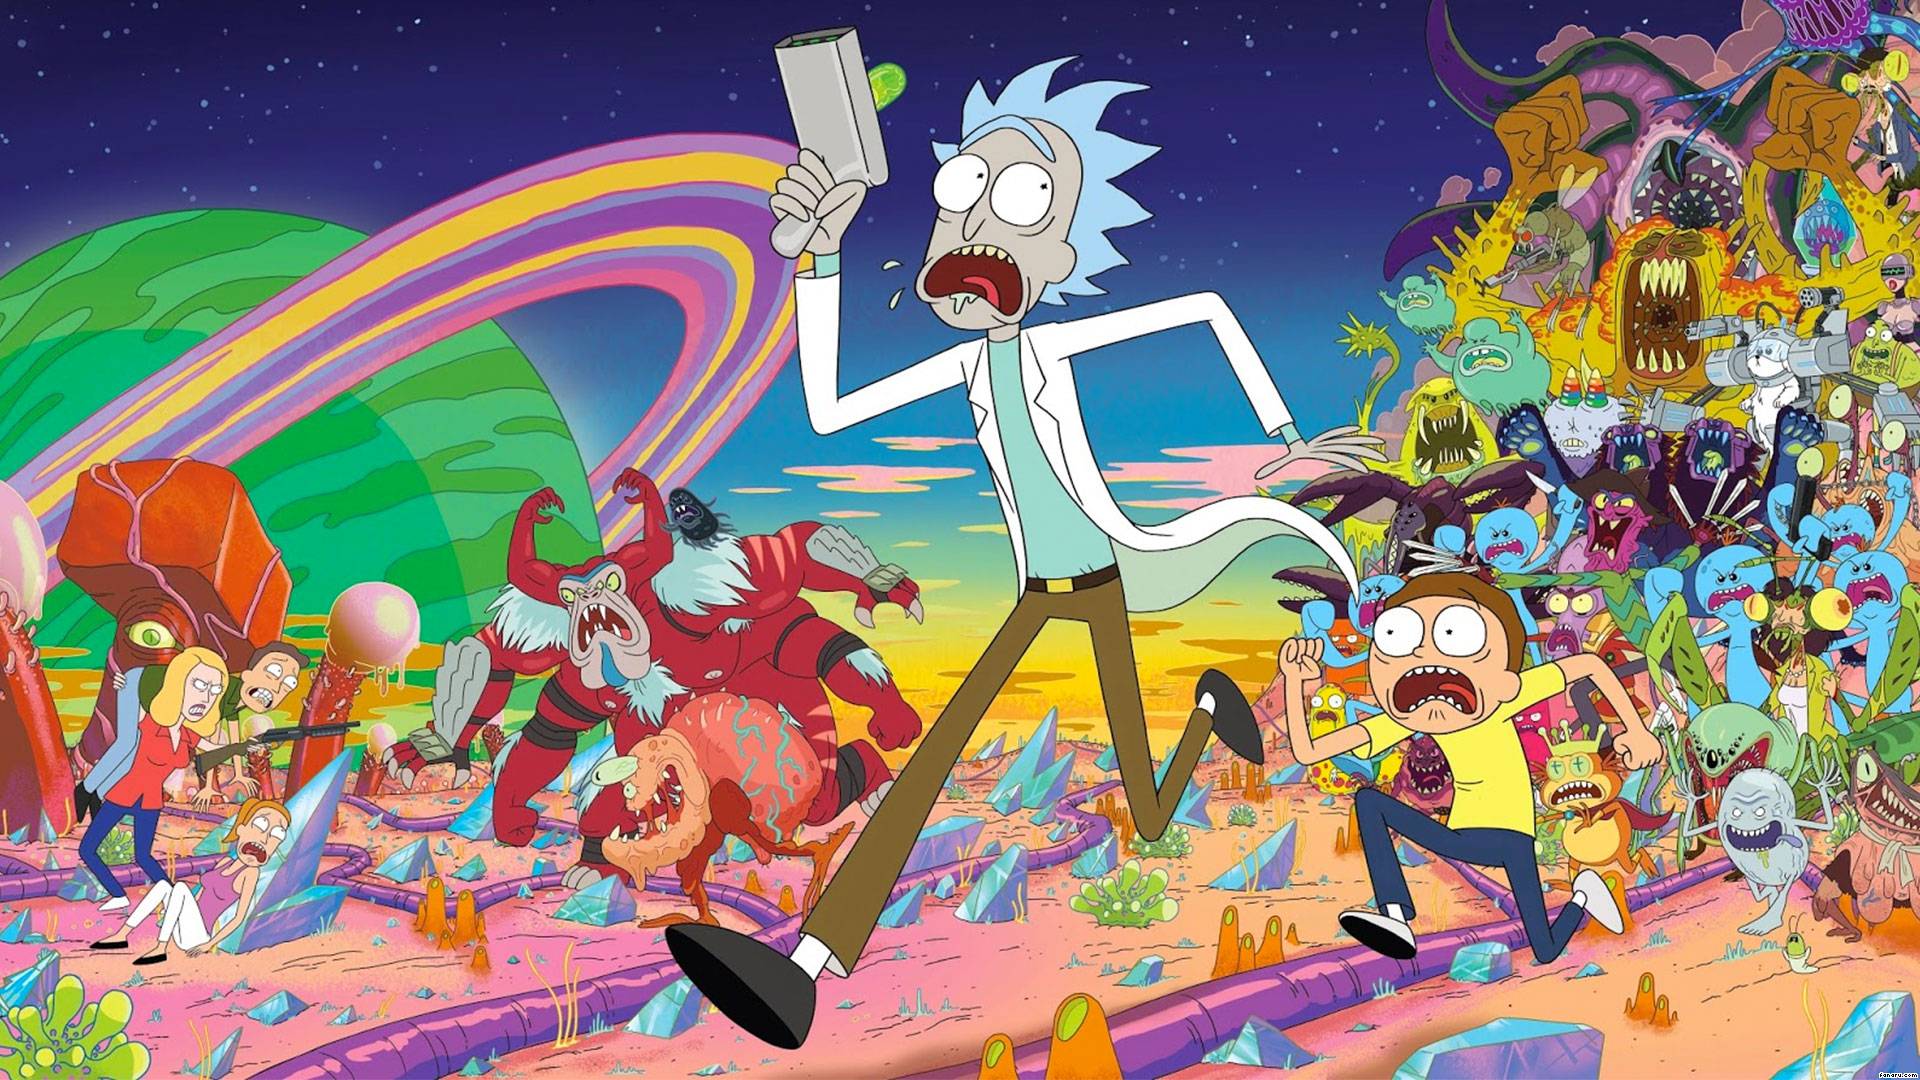 Rick and Morty running from lots of aliens